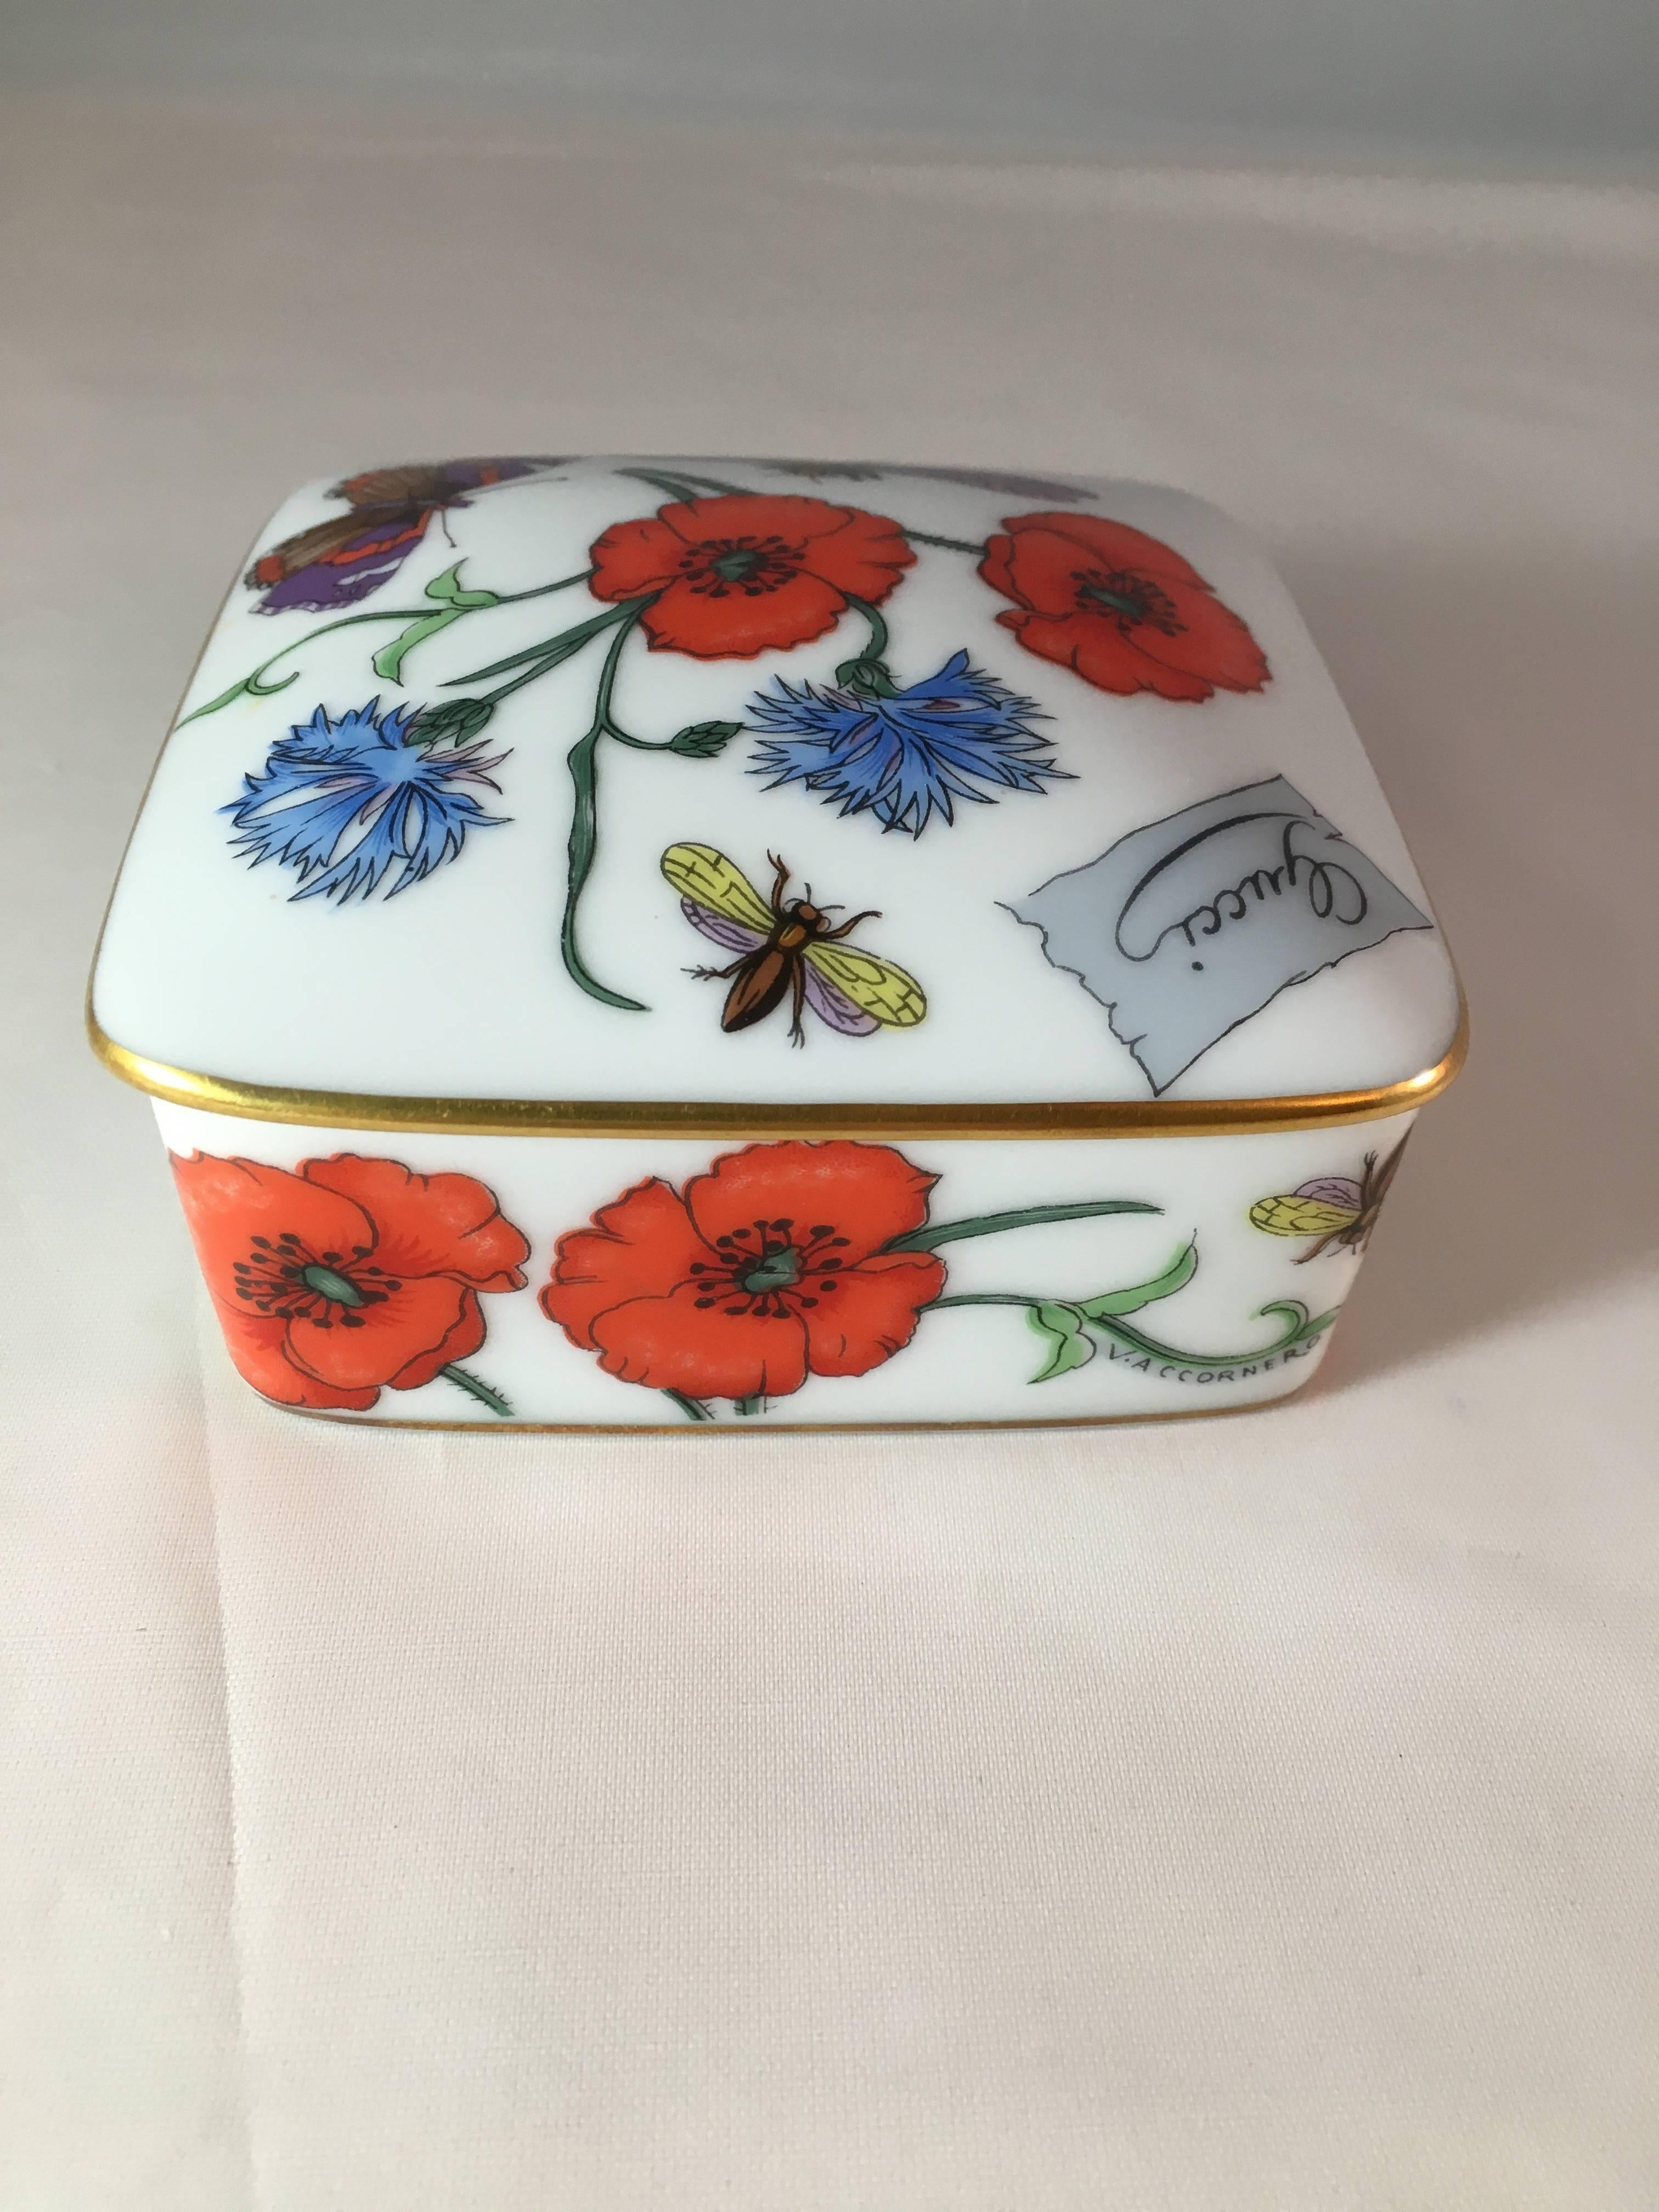 This is a 1970s Gucci floral porcelain trinket box made by Bernardaud Limoges. It is decorated with the iconic 'Flora' pattern designed for Gucci in 1965 by artist Vittorio Accornero. The top of the box is marked 'Gucci' and the back is marked,